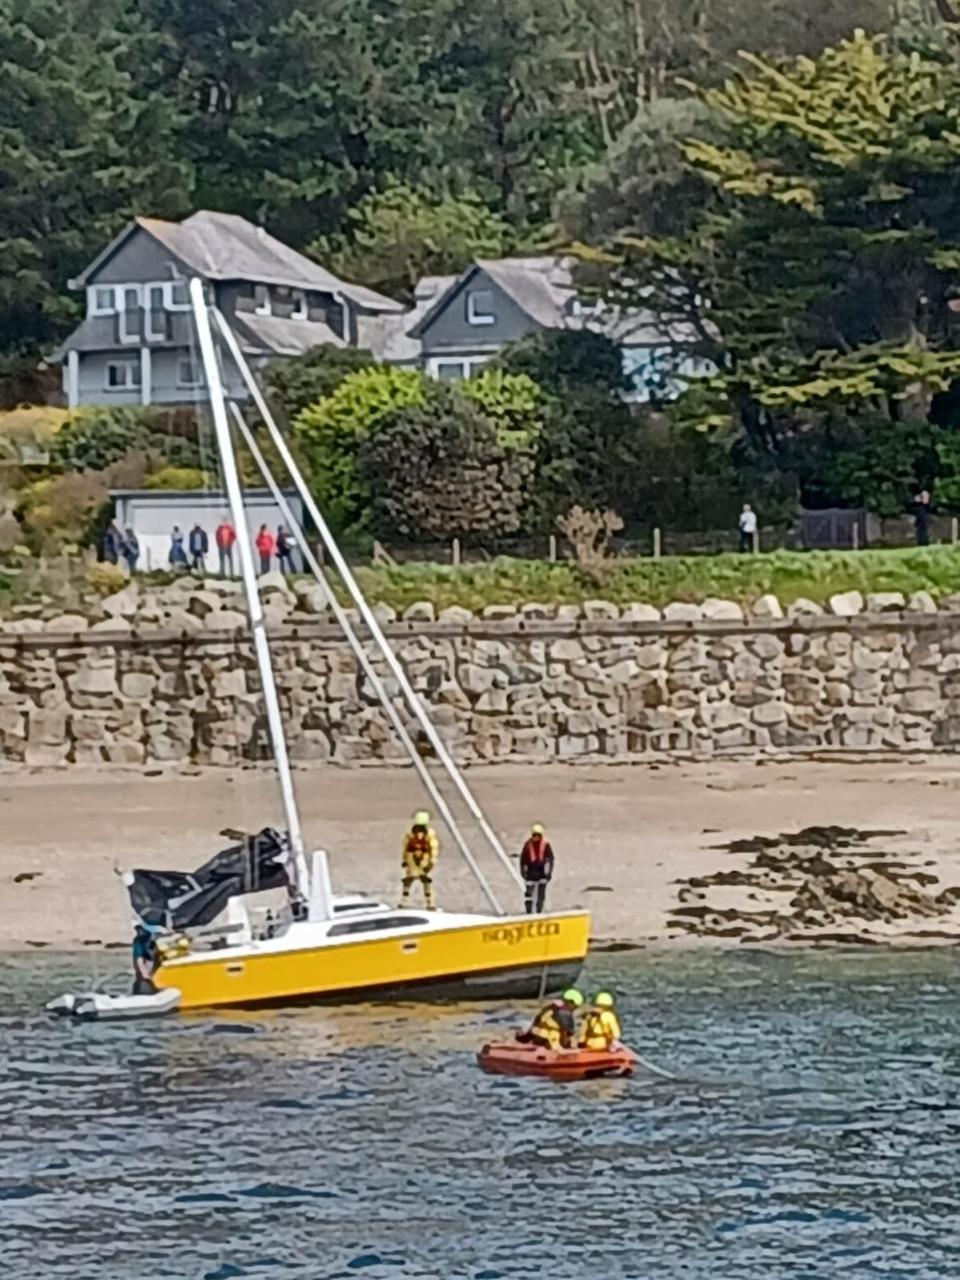 Falmouth Packet: The yacht was run onto the beach